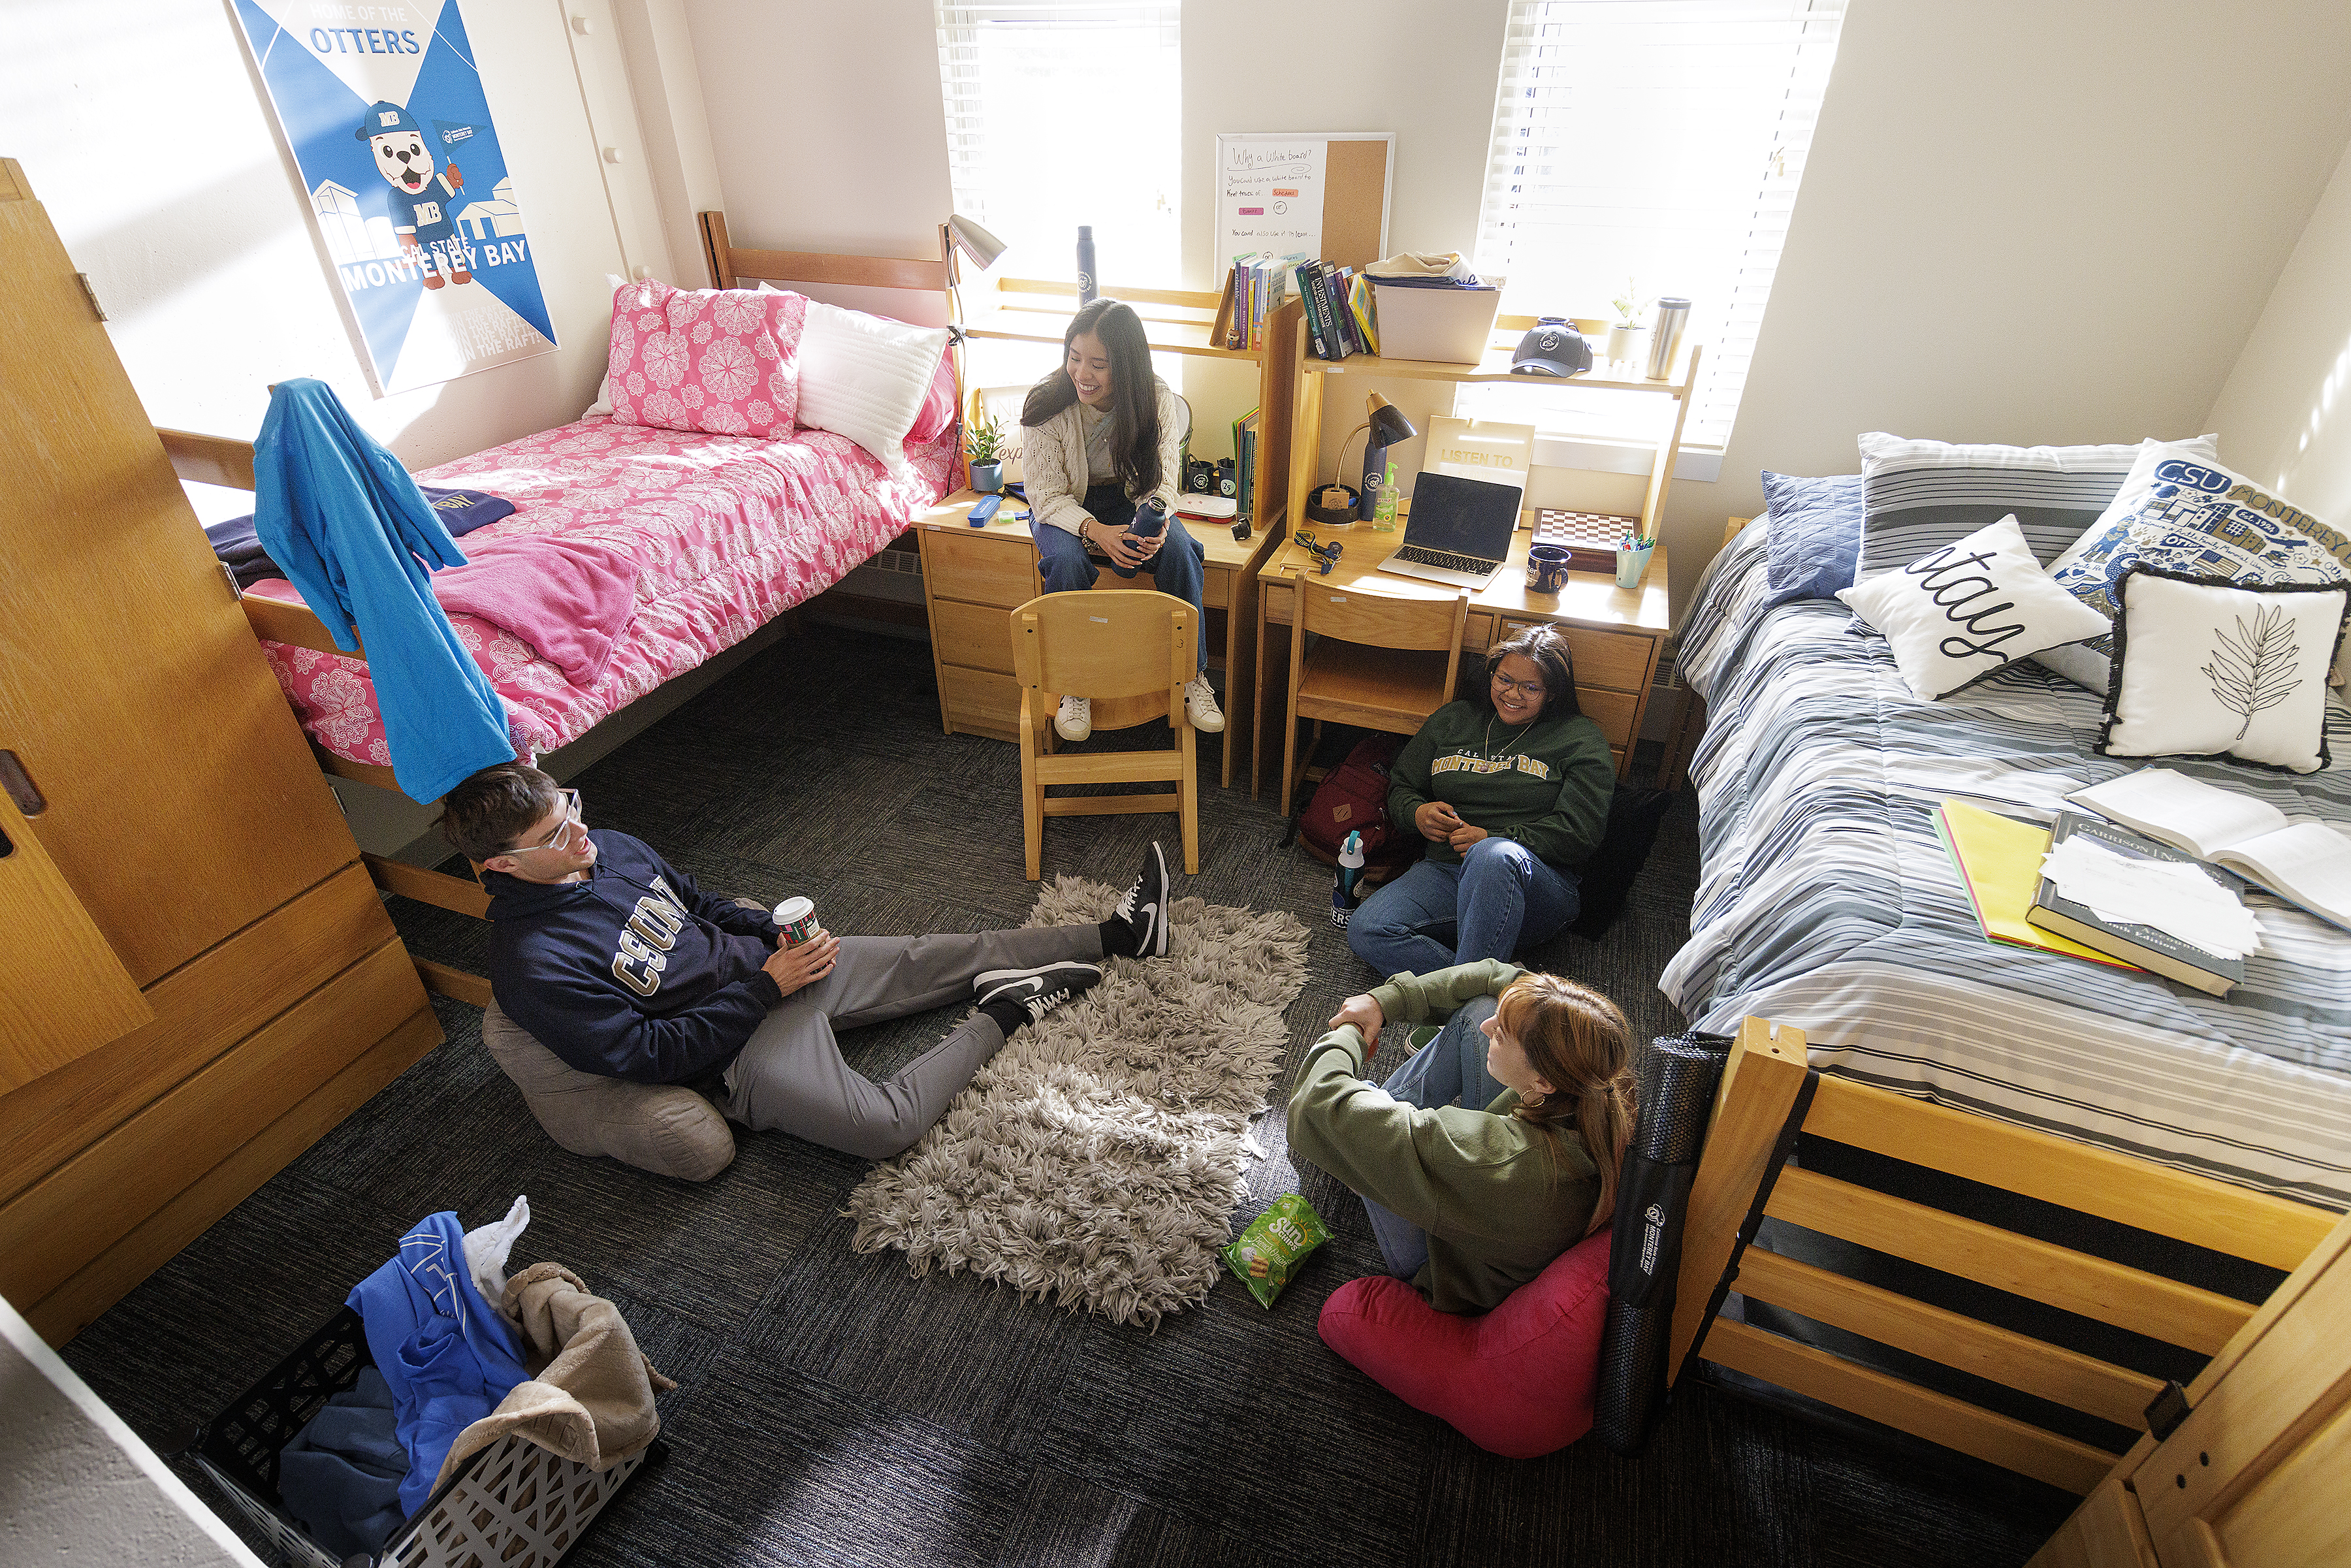 4 students in circle in dorm room talking, two students on the ground, one student on the bed, and one student sitting on a chair